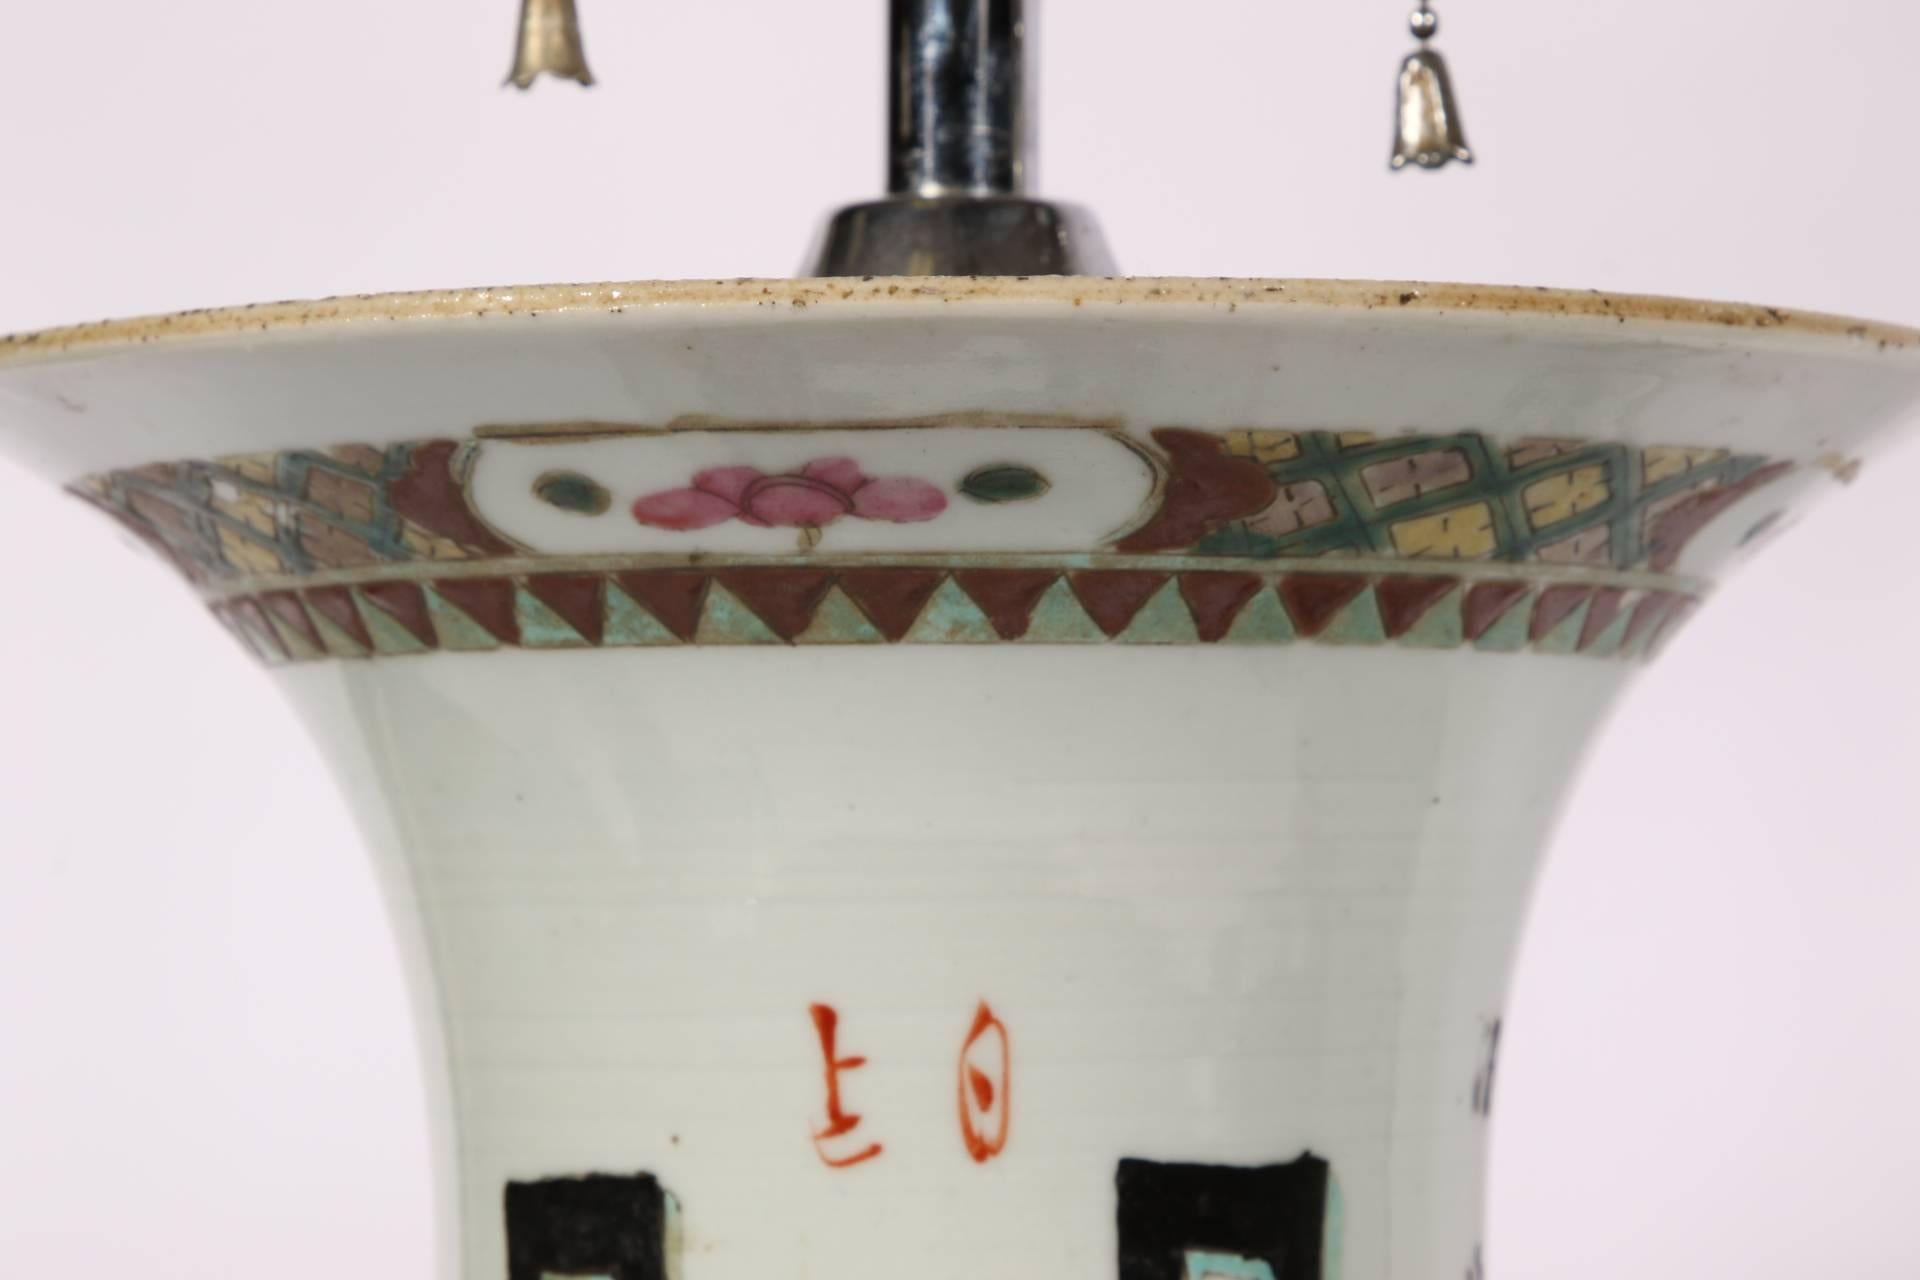 White flared forms with polychrome decoration depicting footed vessels on front and back and inscriptions on the sides. Decorative rim and base bands. Mounted on wooden bases. Chrome fittings. Vase height is 15.75 inches.